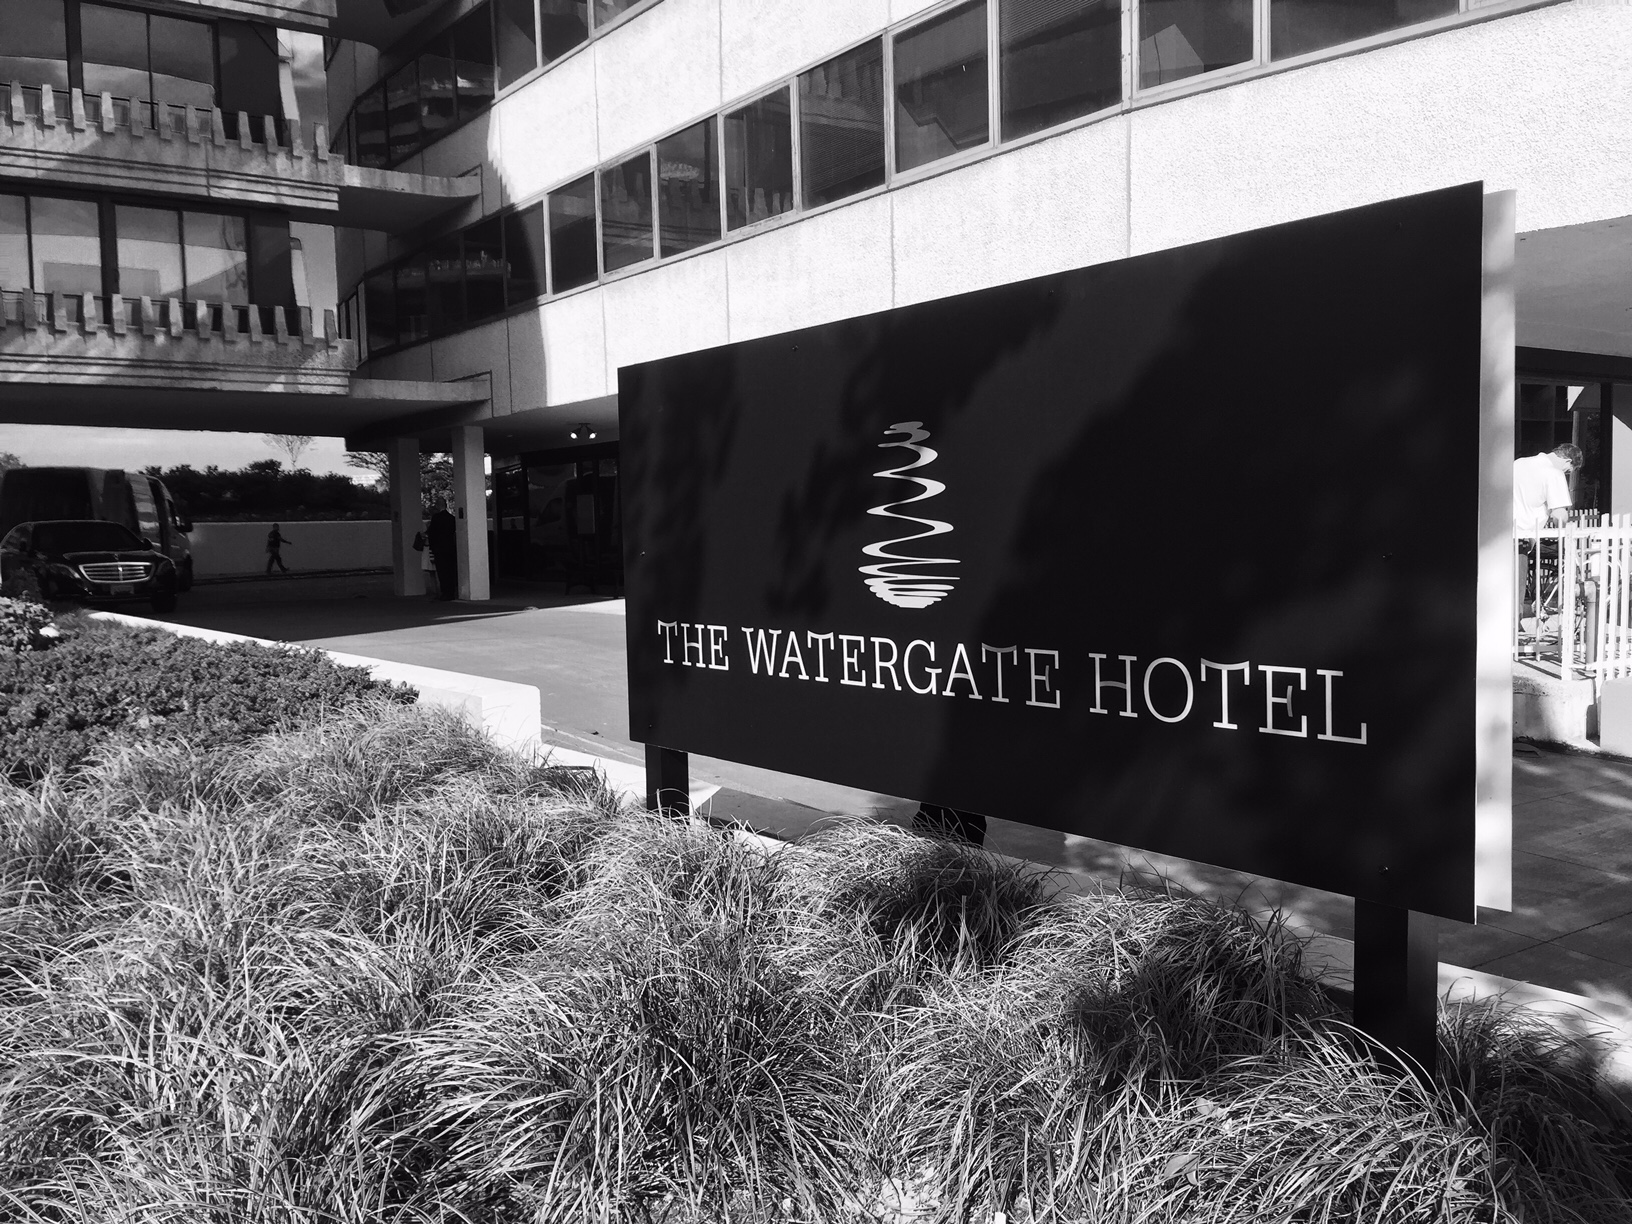 The newly-renovated Watergate Hotel has reopened, after a $125 million, six-year renovation. (WTOP/Neal Augenstein)